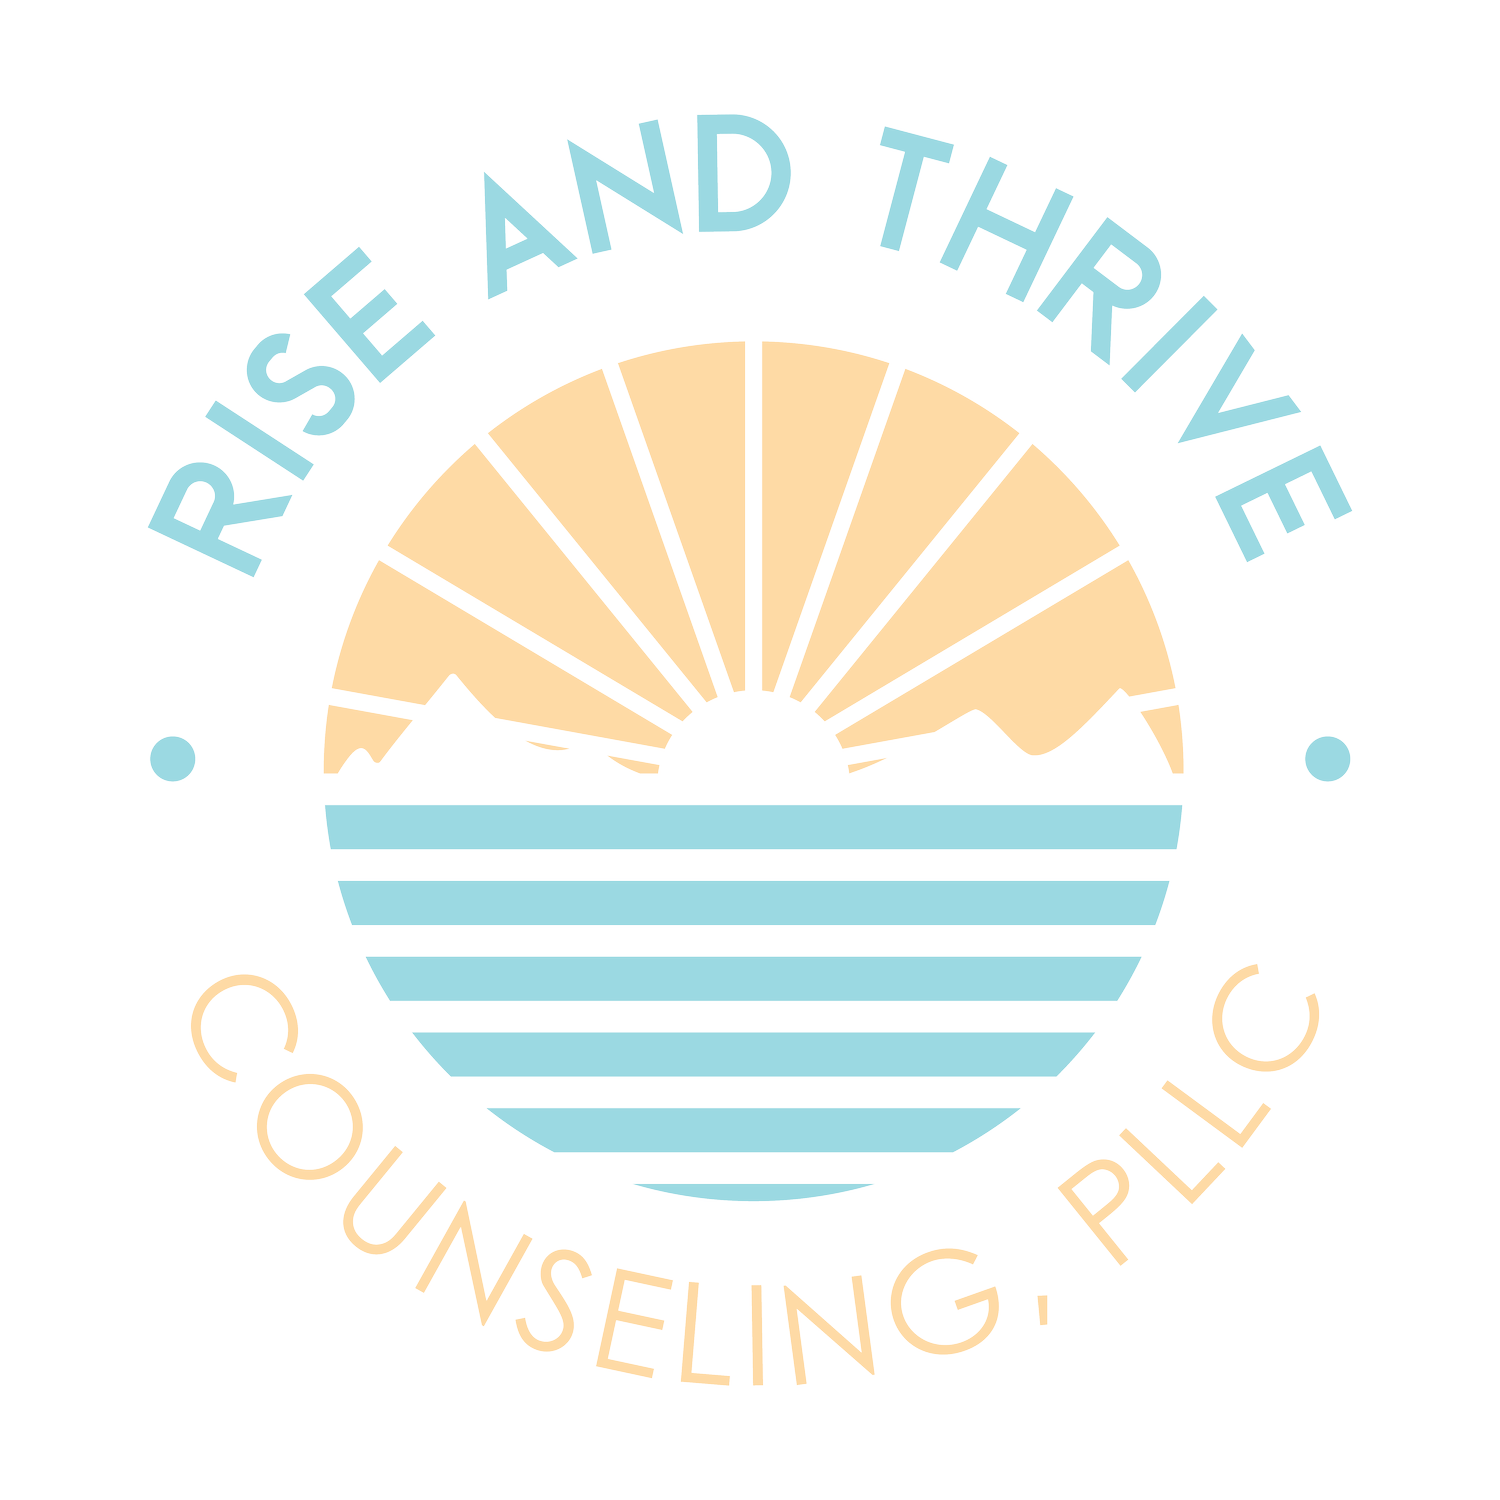 This is the logo for Rise and Thrive Counseling PLLC. A round image of a sunrise over water is featured in the center with the words "Rise and Thrive in blue text above, and the words "Counseling PLLC" in orange text below.